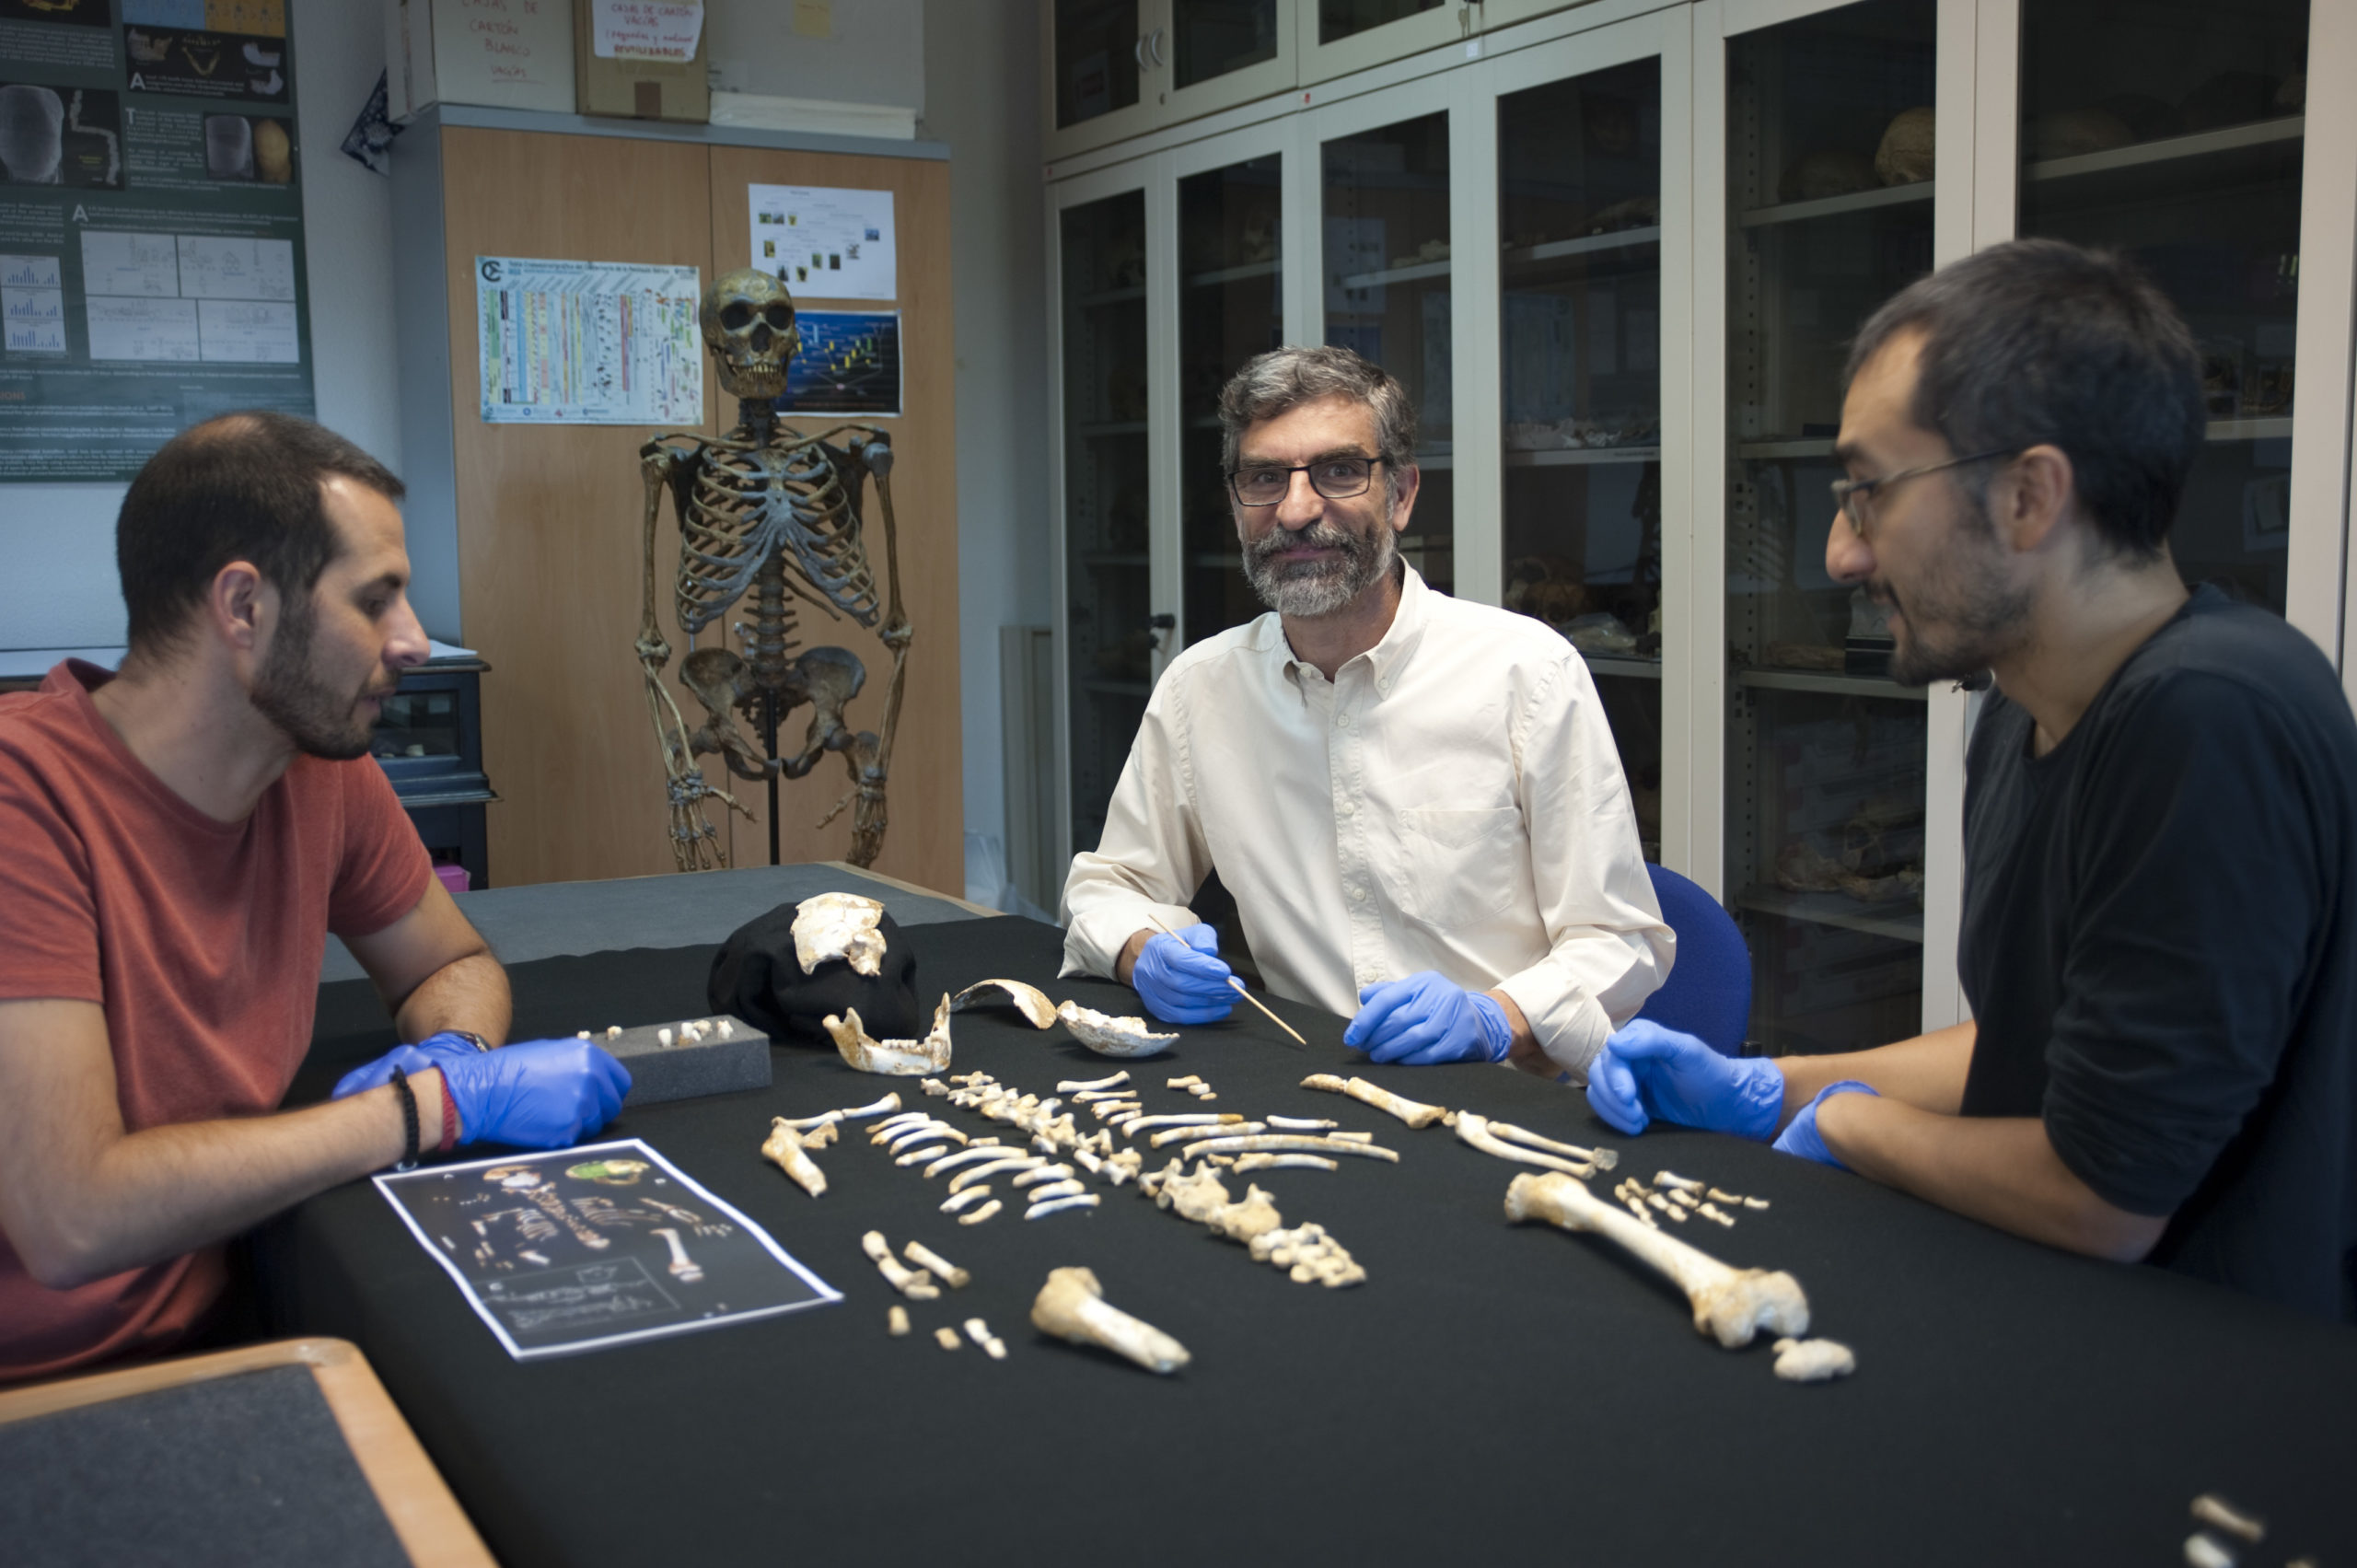 Exquisite Skeleton Of A Neanderthal Kid Offers Clues To Human Evolution